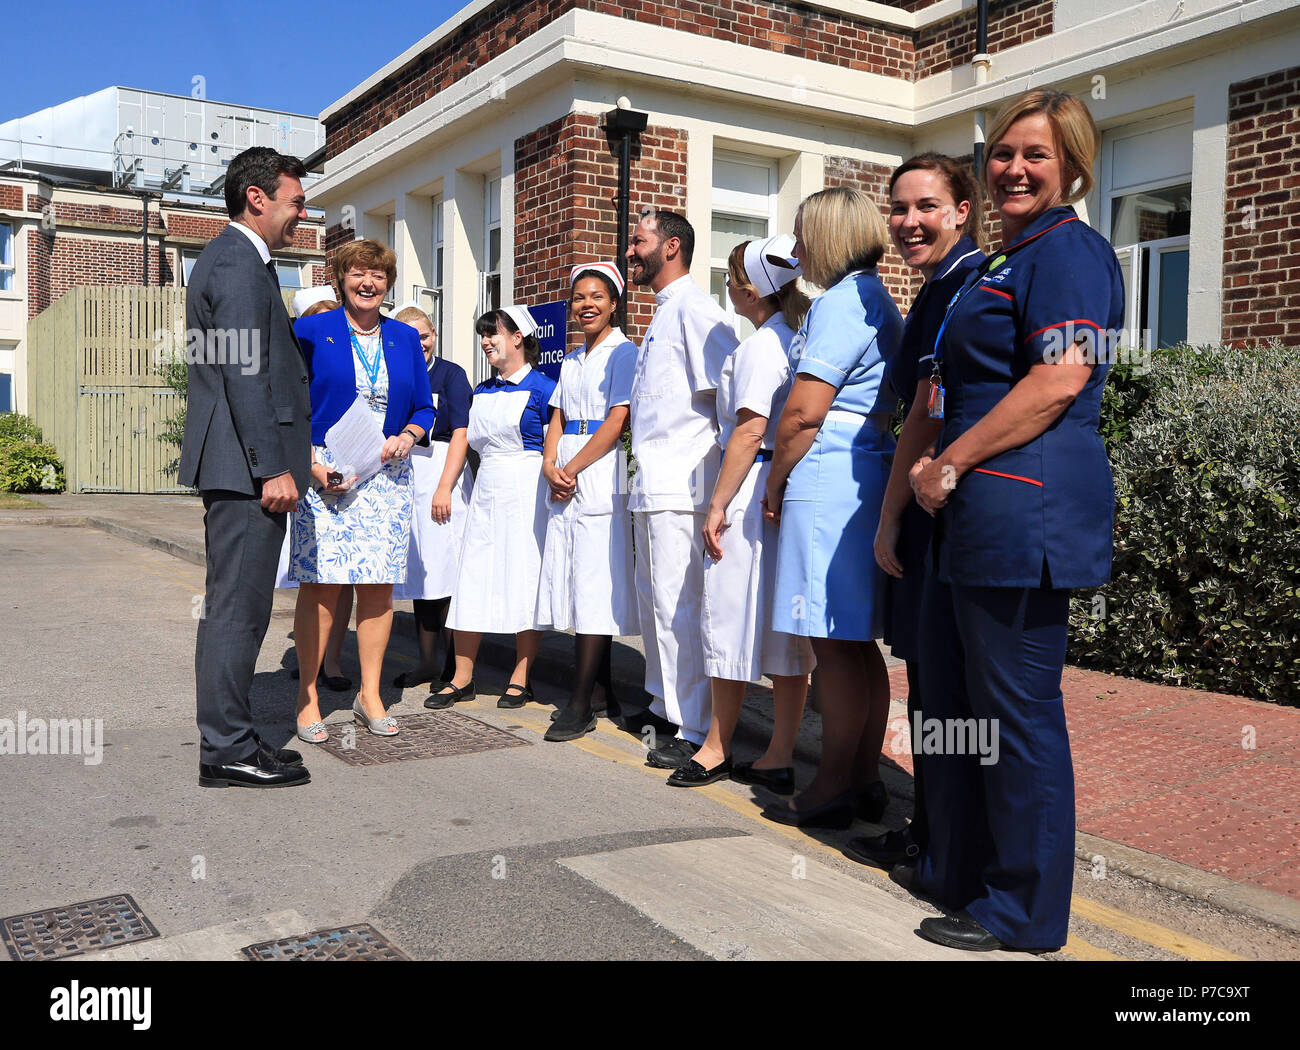 Mayor of Greater Manchester Andy Burnham meets nurses dressed in uniforms from the past 70 years, during a visit to Trafford General Hospital in Manchester to mark the 70th anniversary of the NHS. Stock Photo